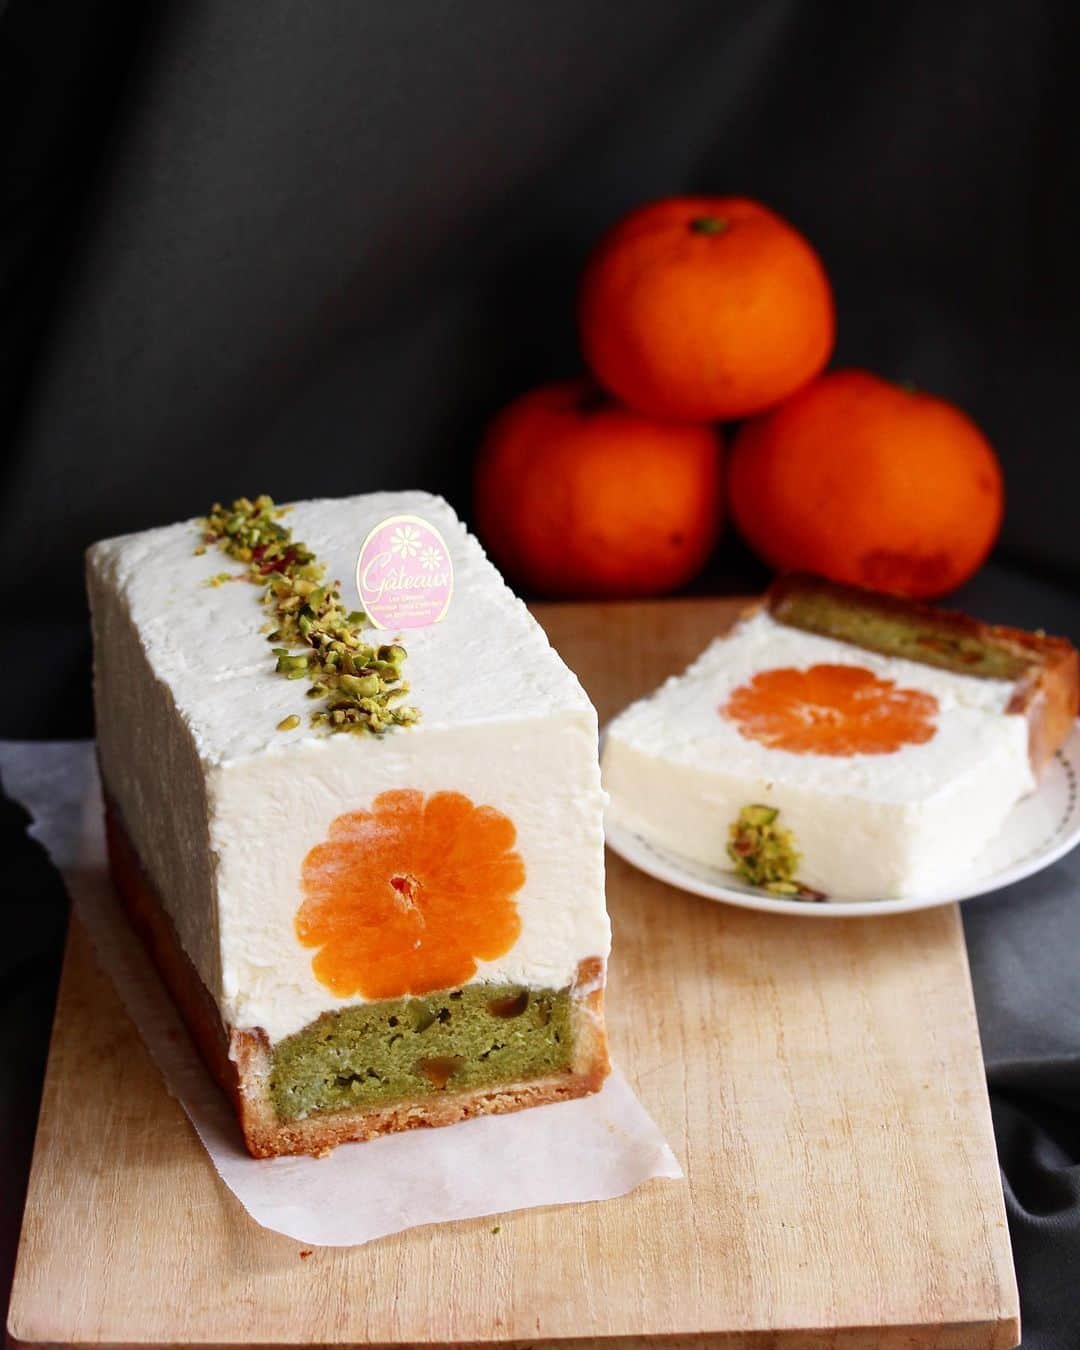 Li Tian の雑貨屋さんのインスタグラム写真 - (Li Tian の雑貨屋Instagram)「CNY SPECIAL 🧧 — Prosperity Gold Bar 🍊 Tangy Yoghurt Fromage Cheese, Japanese Mikans, Pisatchio Almond Tart Filling, Pate Sable Base   Preorders now open for the dates below. Kindly DM to order. As usual, full payment is required to confirm the order. Thank you.   Price: $45/ whole tart (serves 5-6)  Shell Life : 3 days  Collection Timings:  Feb 6 (Sat) 3-5pm FULL  Feb 11 除夕(Thu) 12-3pm FULL  Feb 13 初二 (Sat) 3-5pm LAST SLOT  Feb 14 初三 (Sun) 3-5pm  Collection Point: 5min walk from Tiong Bahru MRT (or you may wish to arrange your own delivery)  Payment mode: Google Pay (Enjoy $3 immediate cashback to your bank account for first-time Google Pay users using my referral code bm5yj2b) OR Paynow/PayLah OR bank transfer   #dairycreamkitchen #singapore #desserts #igersjp #yummy #love #sgfood #foodporn #igsg #ケーキ  #instafood #beautifulcuisines #sgbakes #bonappetit #cafe #cakes #bake #sgcakes #スイーツ #feedfeed #pastry #sgcafe #cake #homebaker #stayhomesg #homebake #pistachio #tarts #orange #cheesecake」1月30日 11時54分 - dairyandcream